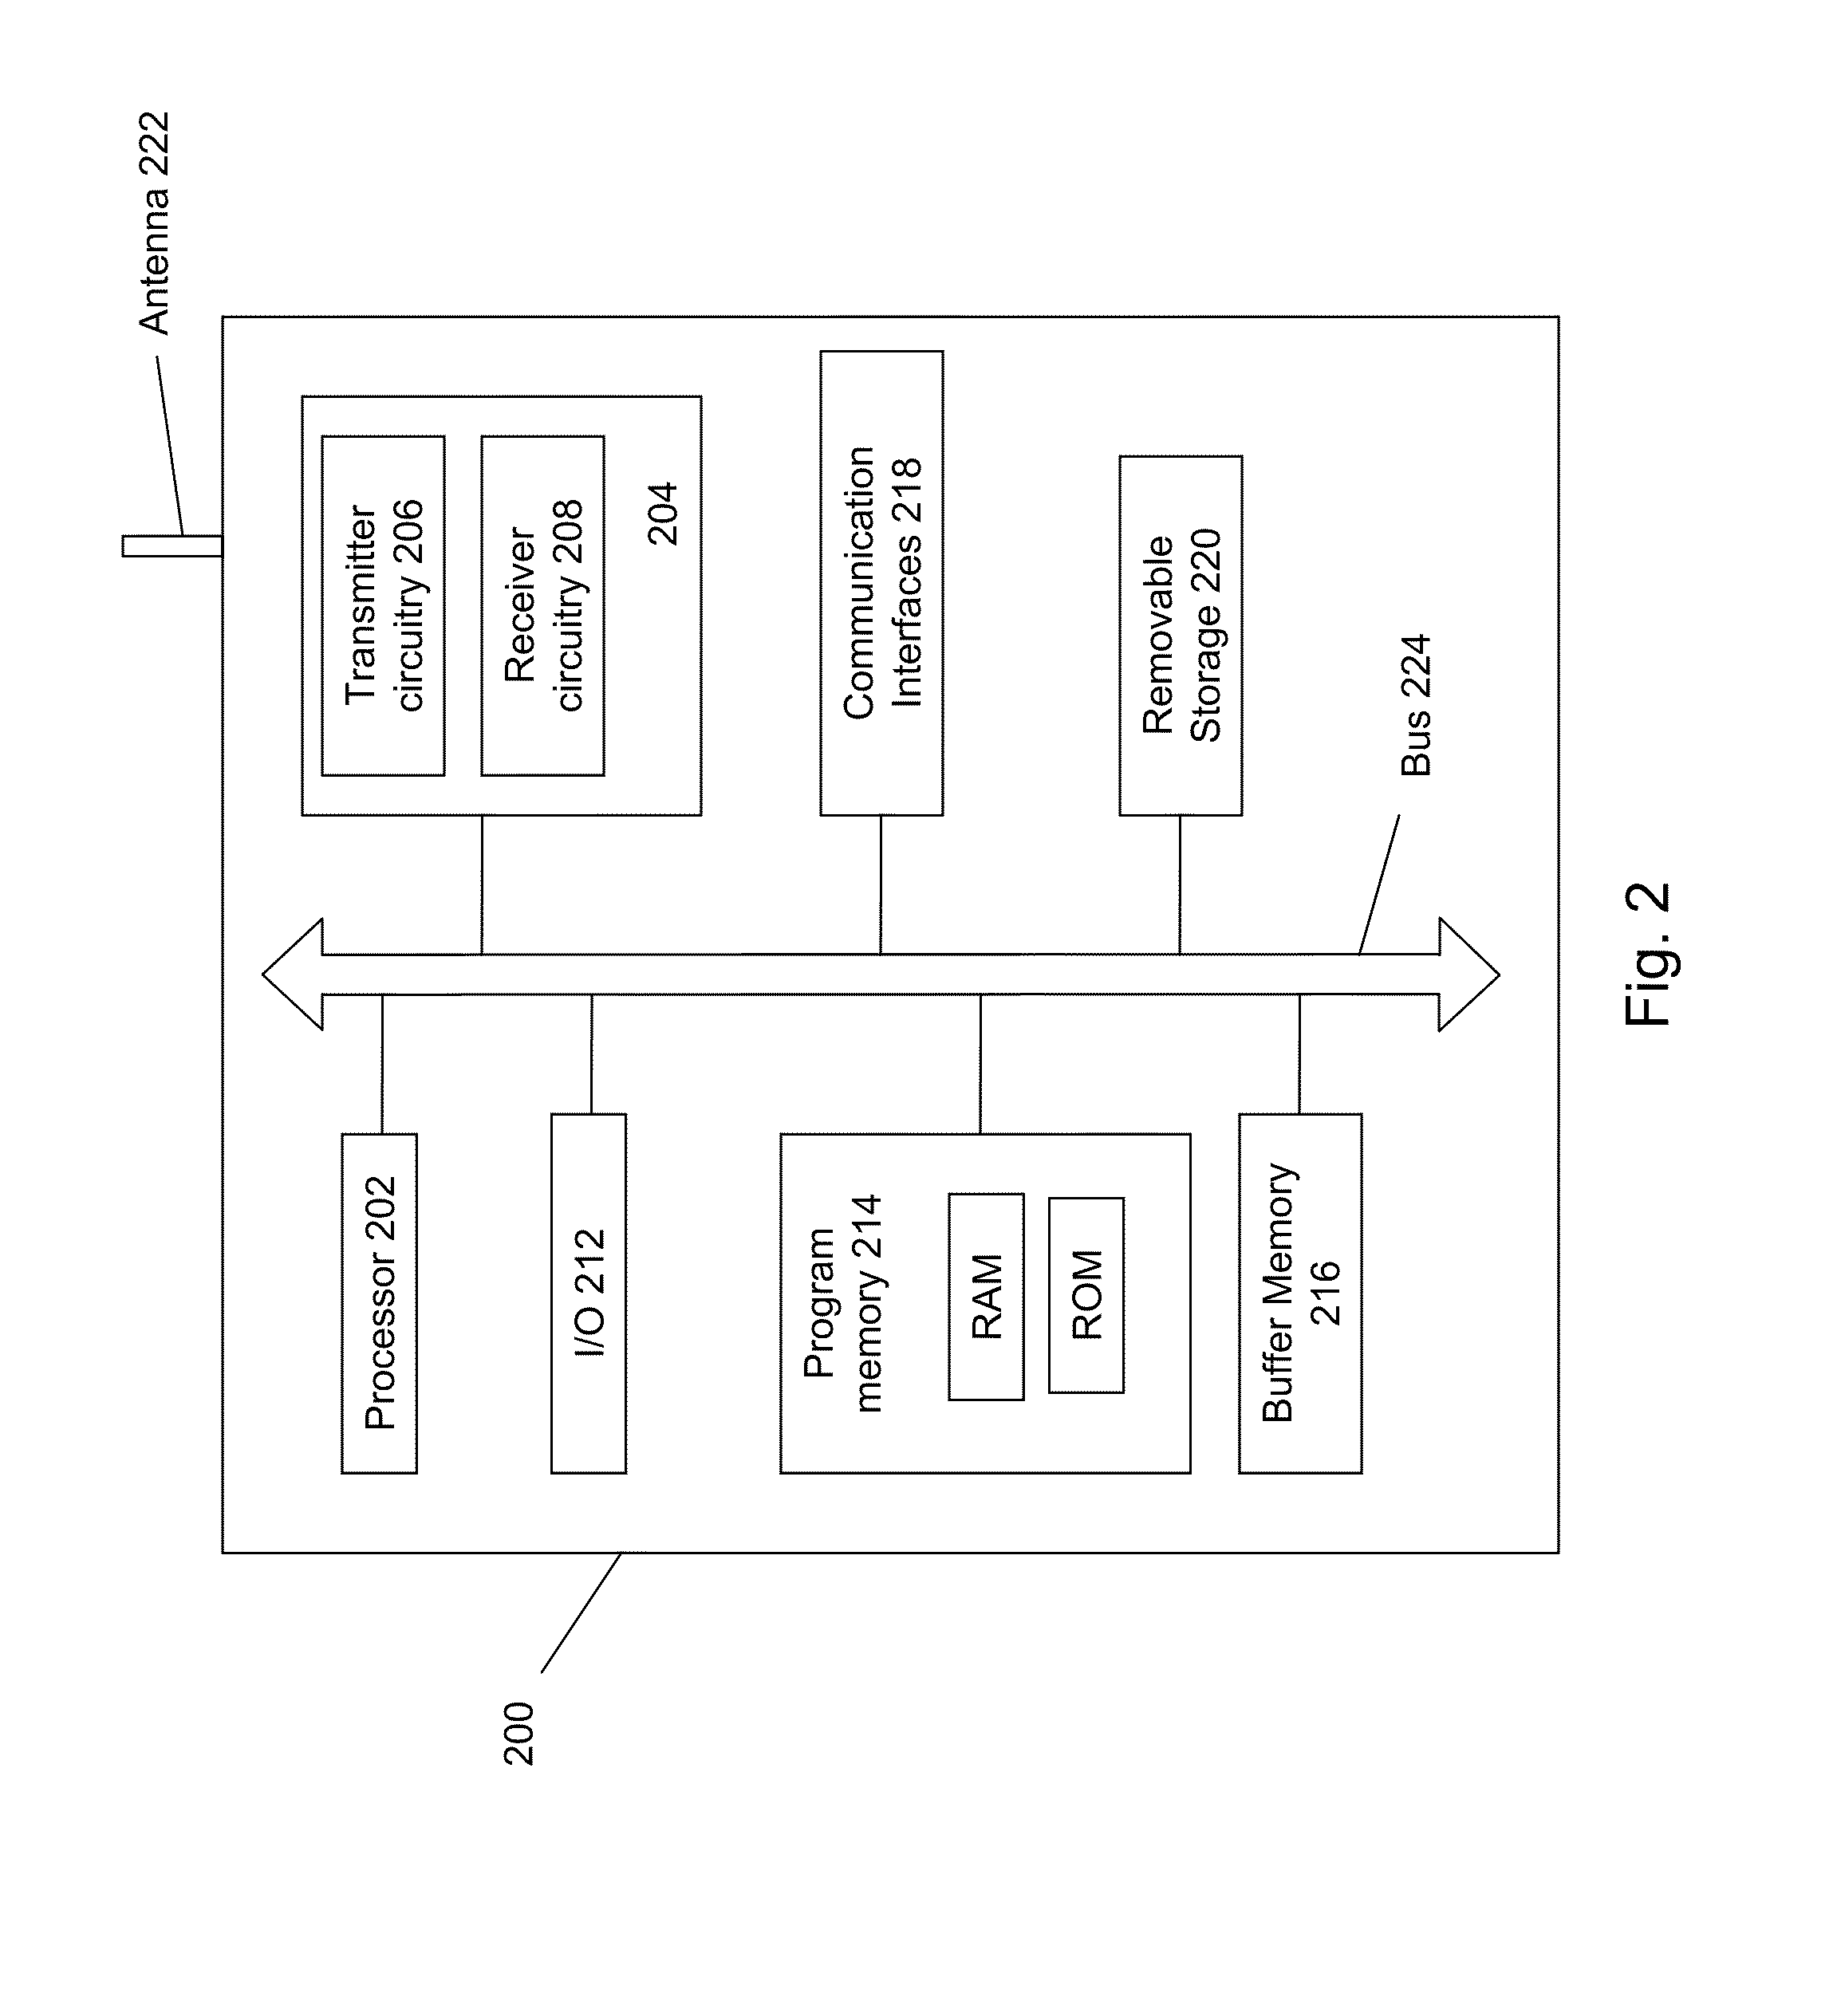 Parallel forward path cartesian feedback loop and loop filter with switchable order for cartesian feedback loops